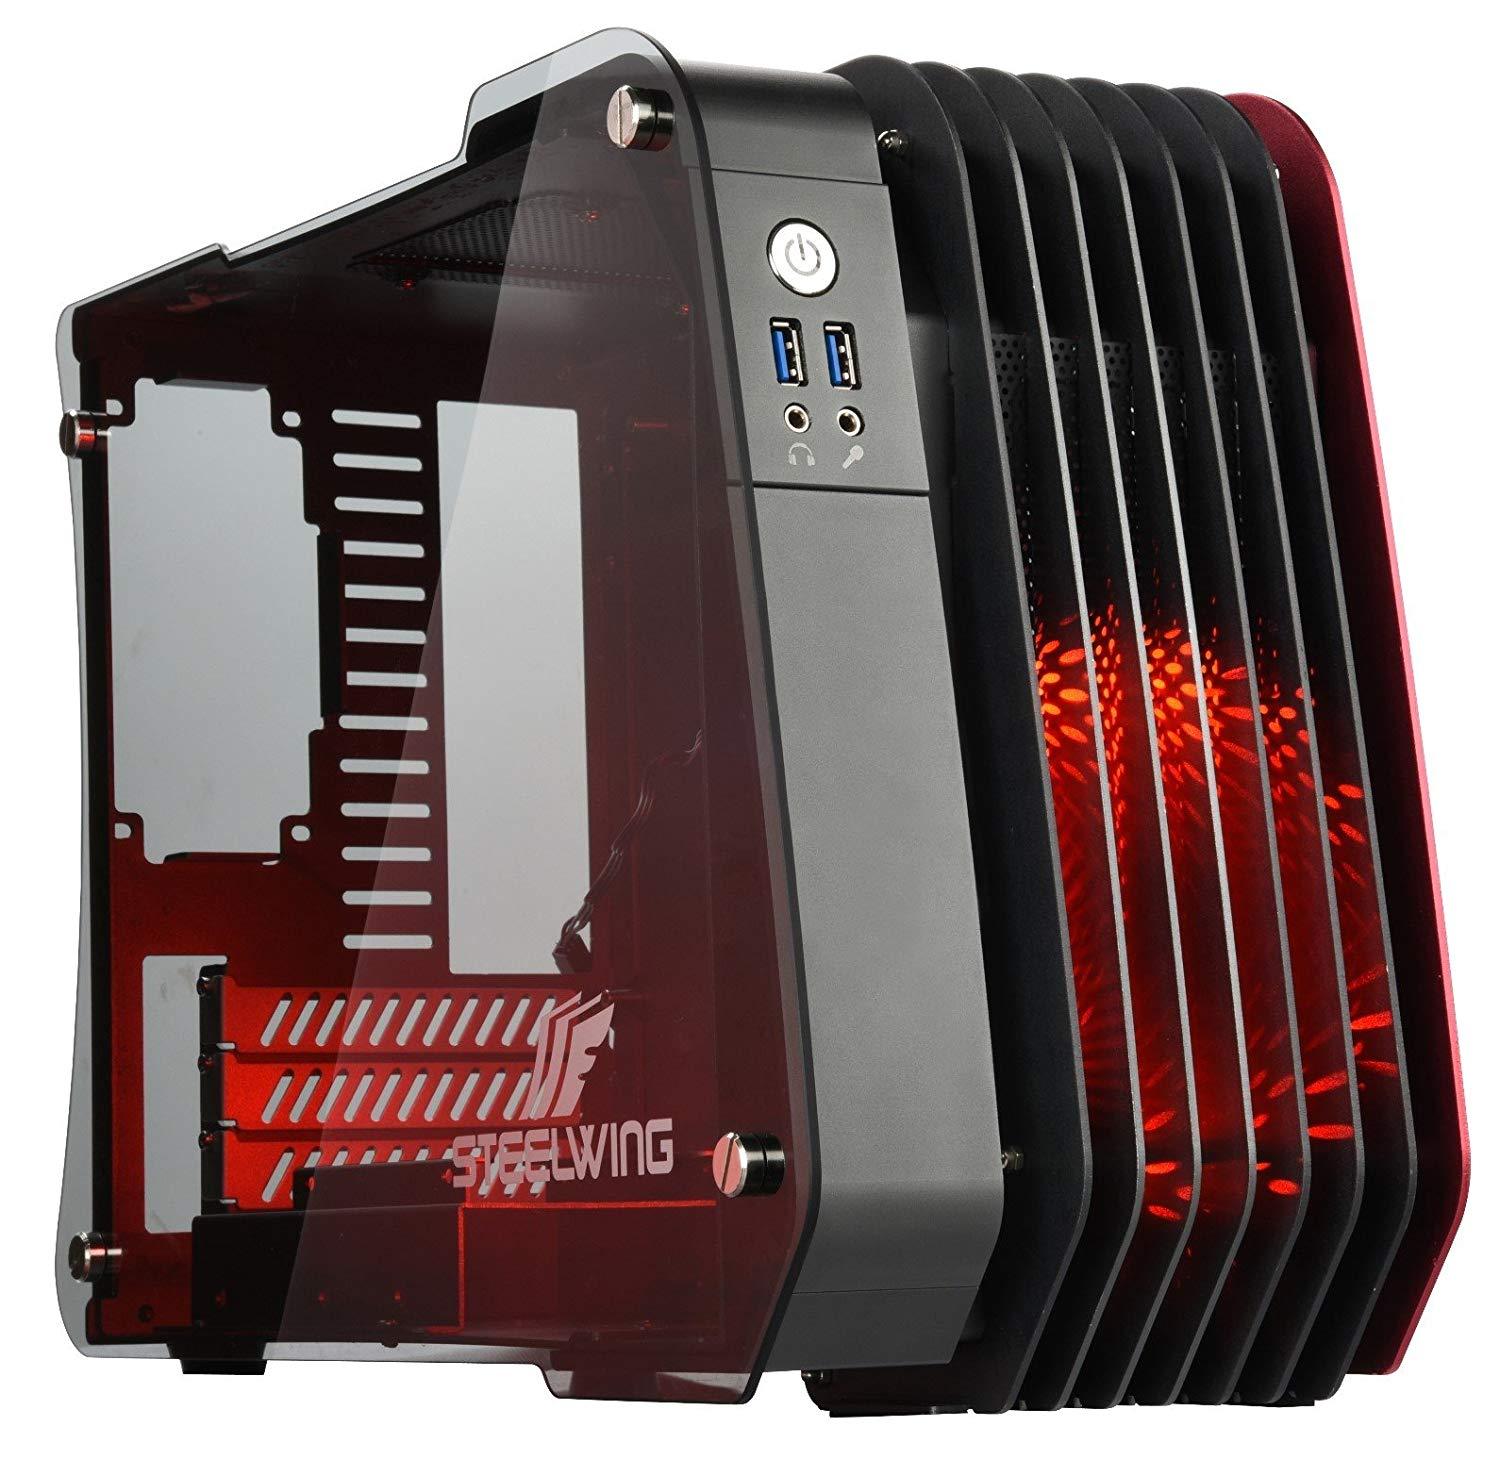 Enermax Steelwing Micro ATX Mid Tower Case - Red - Store 974 | ستور ٩٧٤